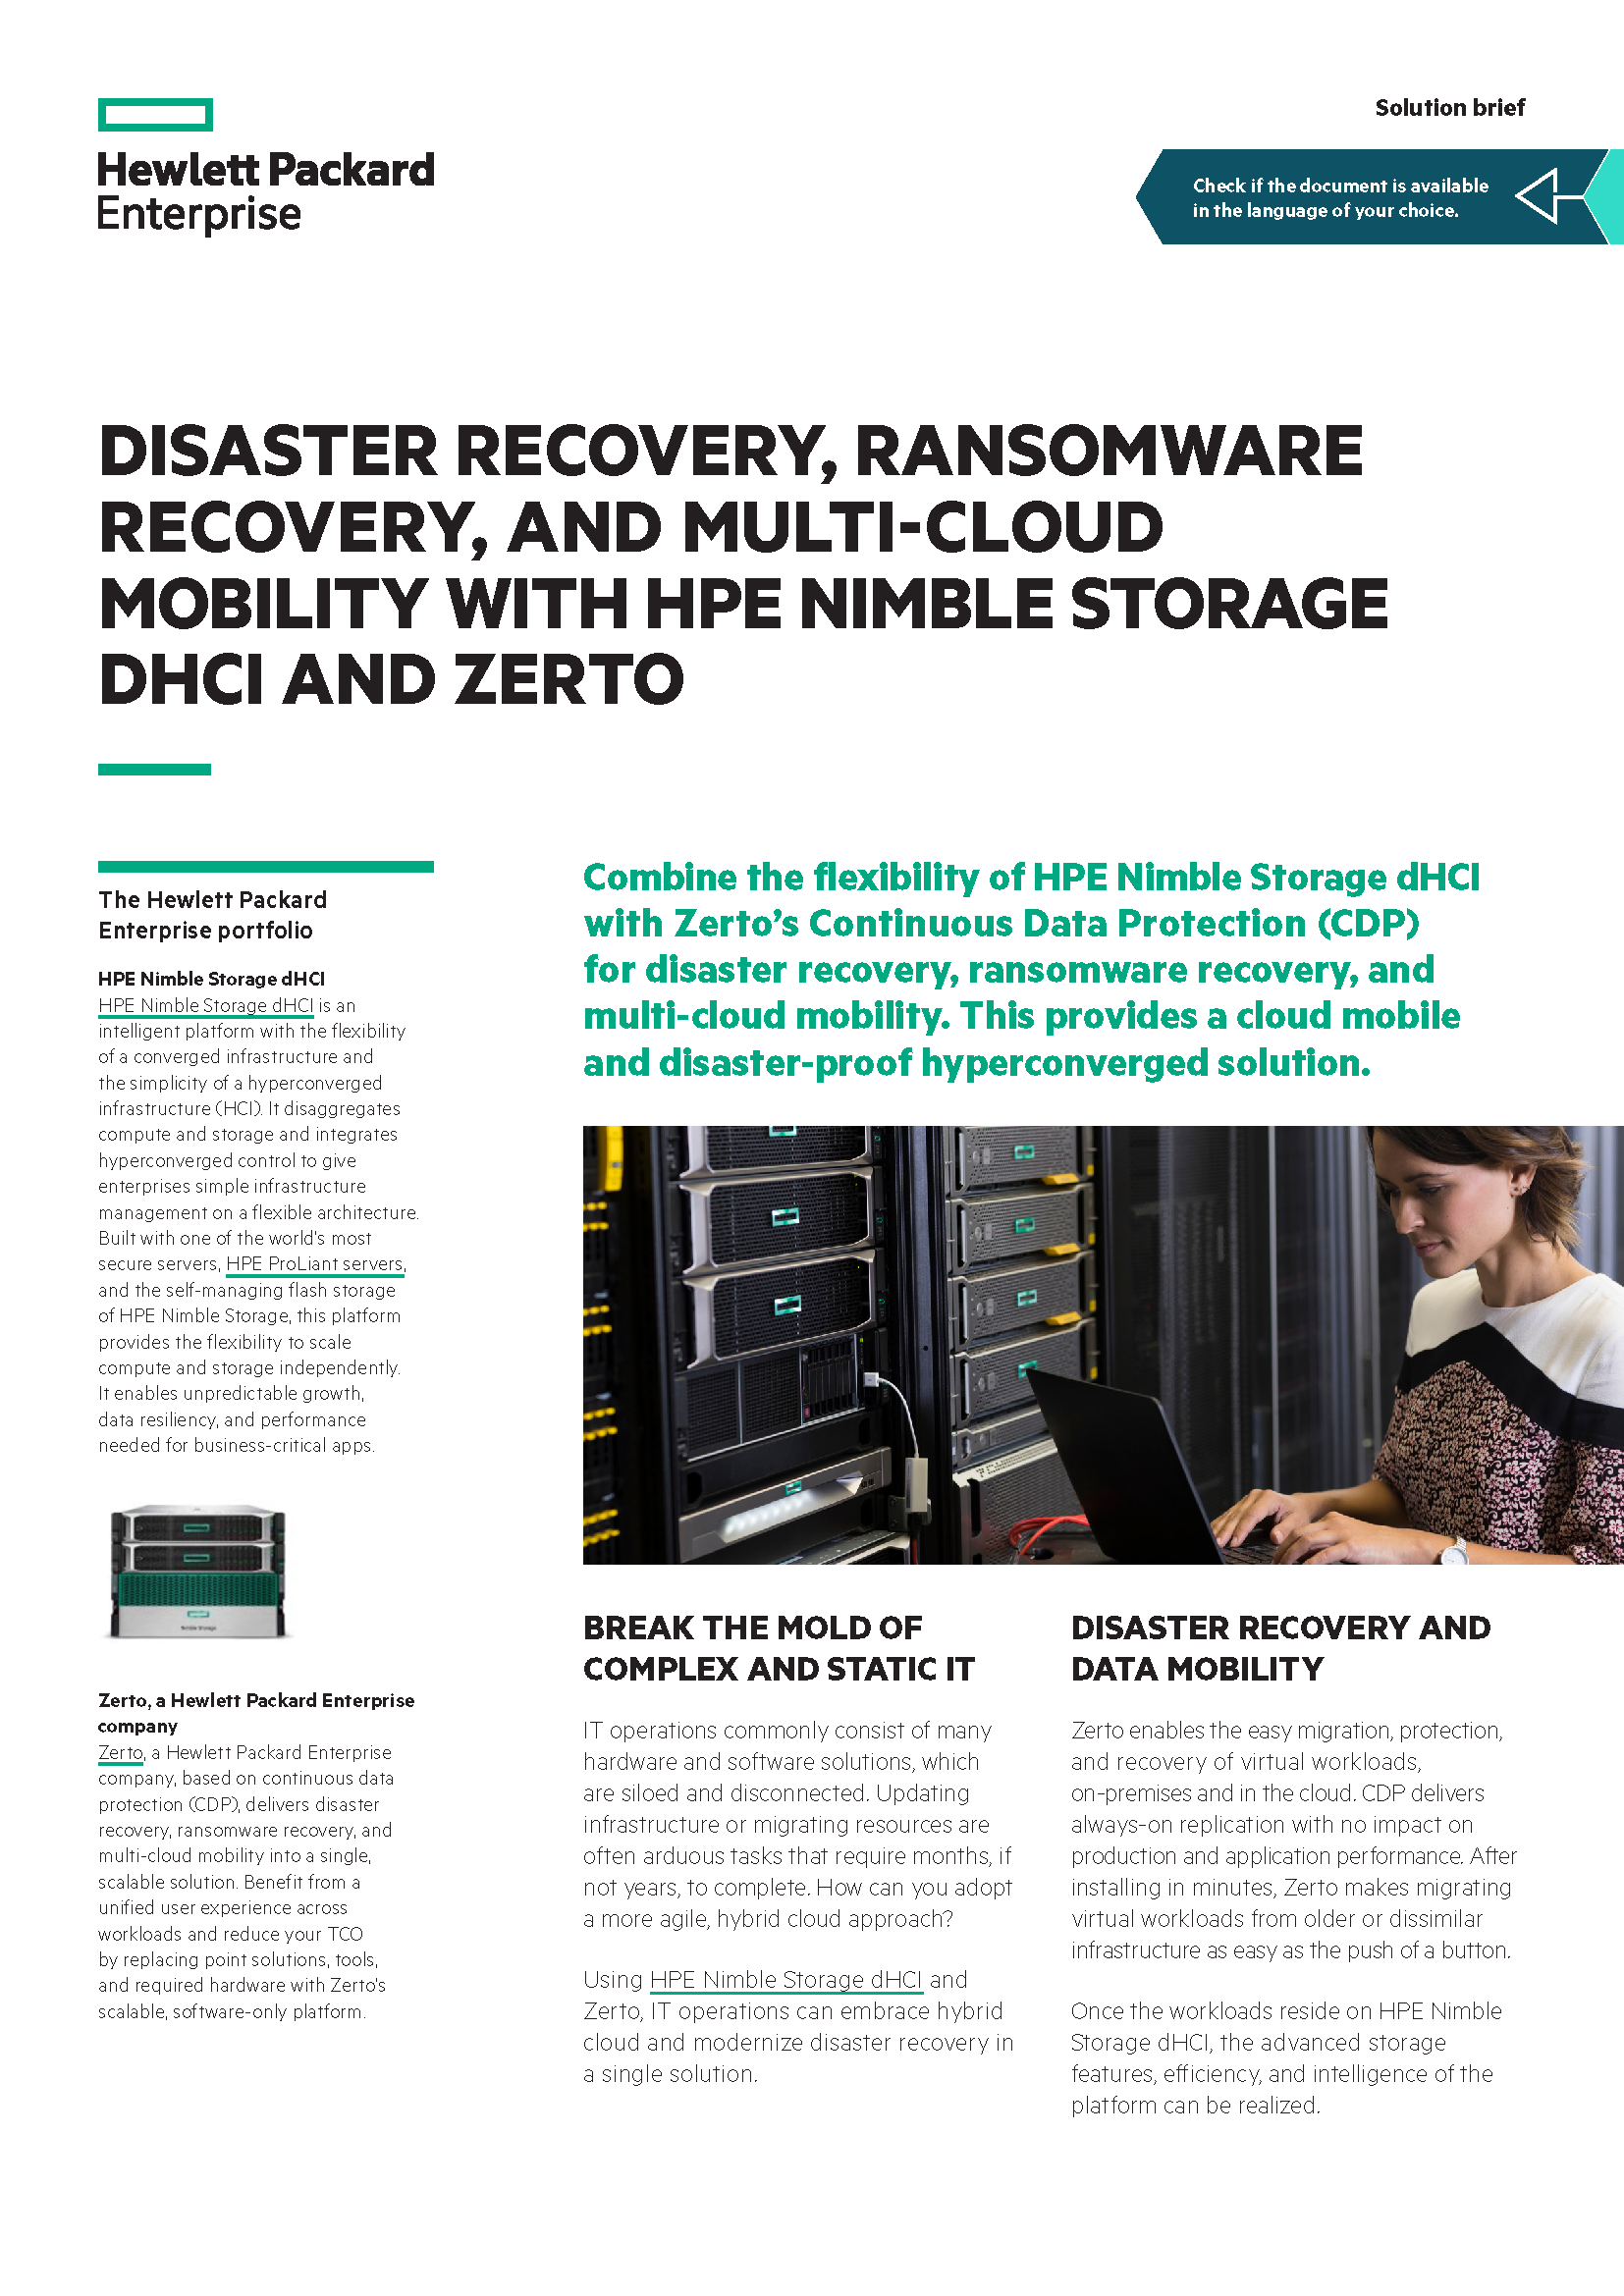 Disaster_recovery_ransomware_recovery_and_multi-cloud_mobility_with_HPE_Nimble_Storage_dHCI_and_Zerto_solution_brief-a50005574enw_Page_1